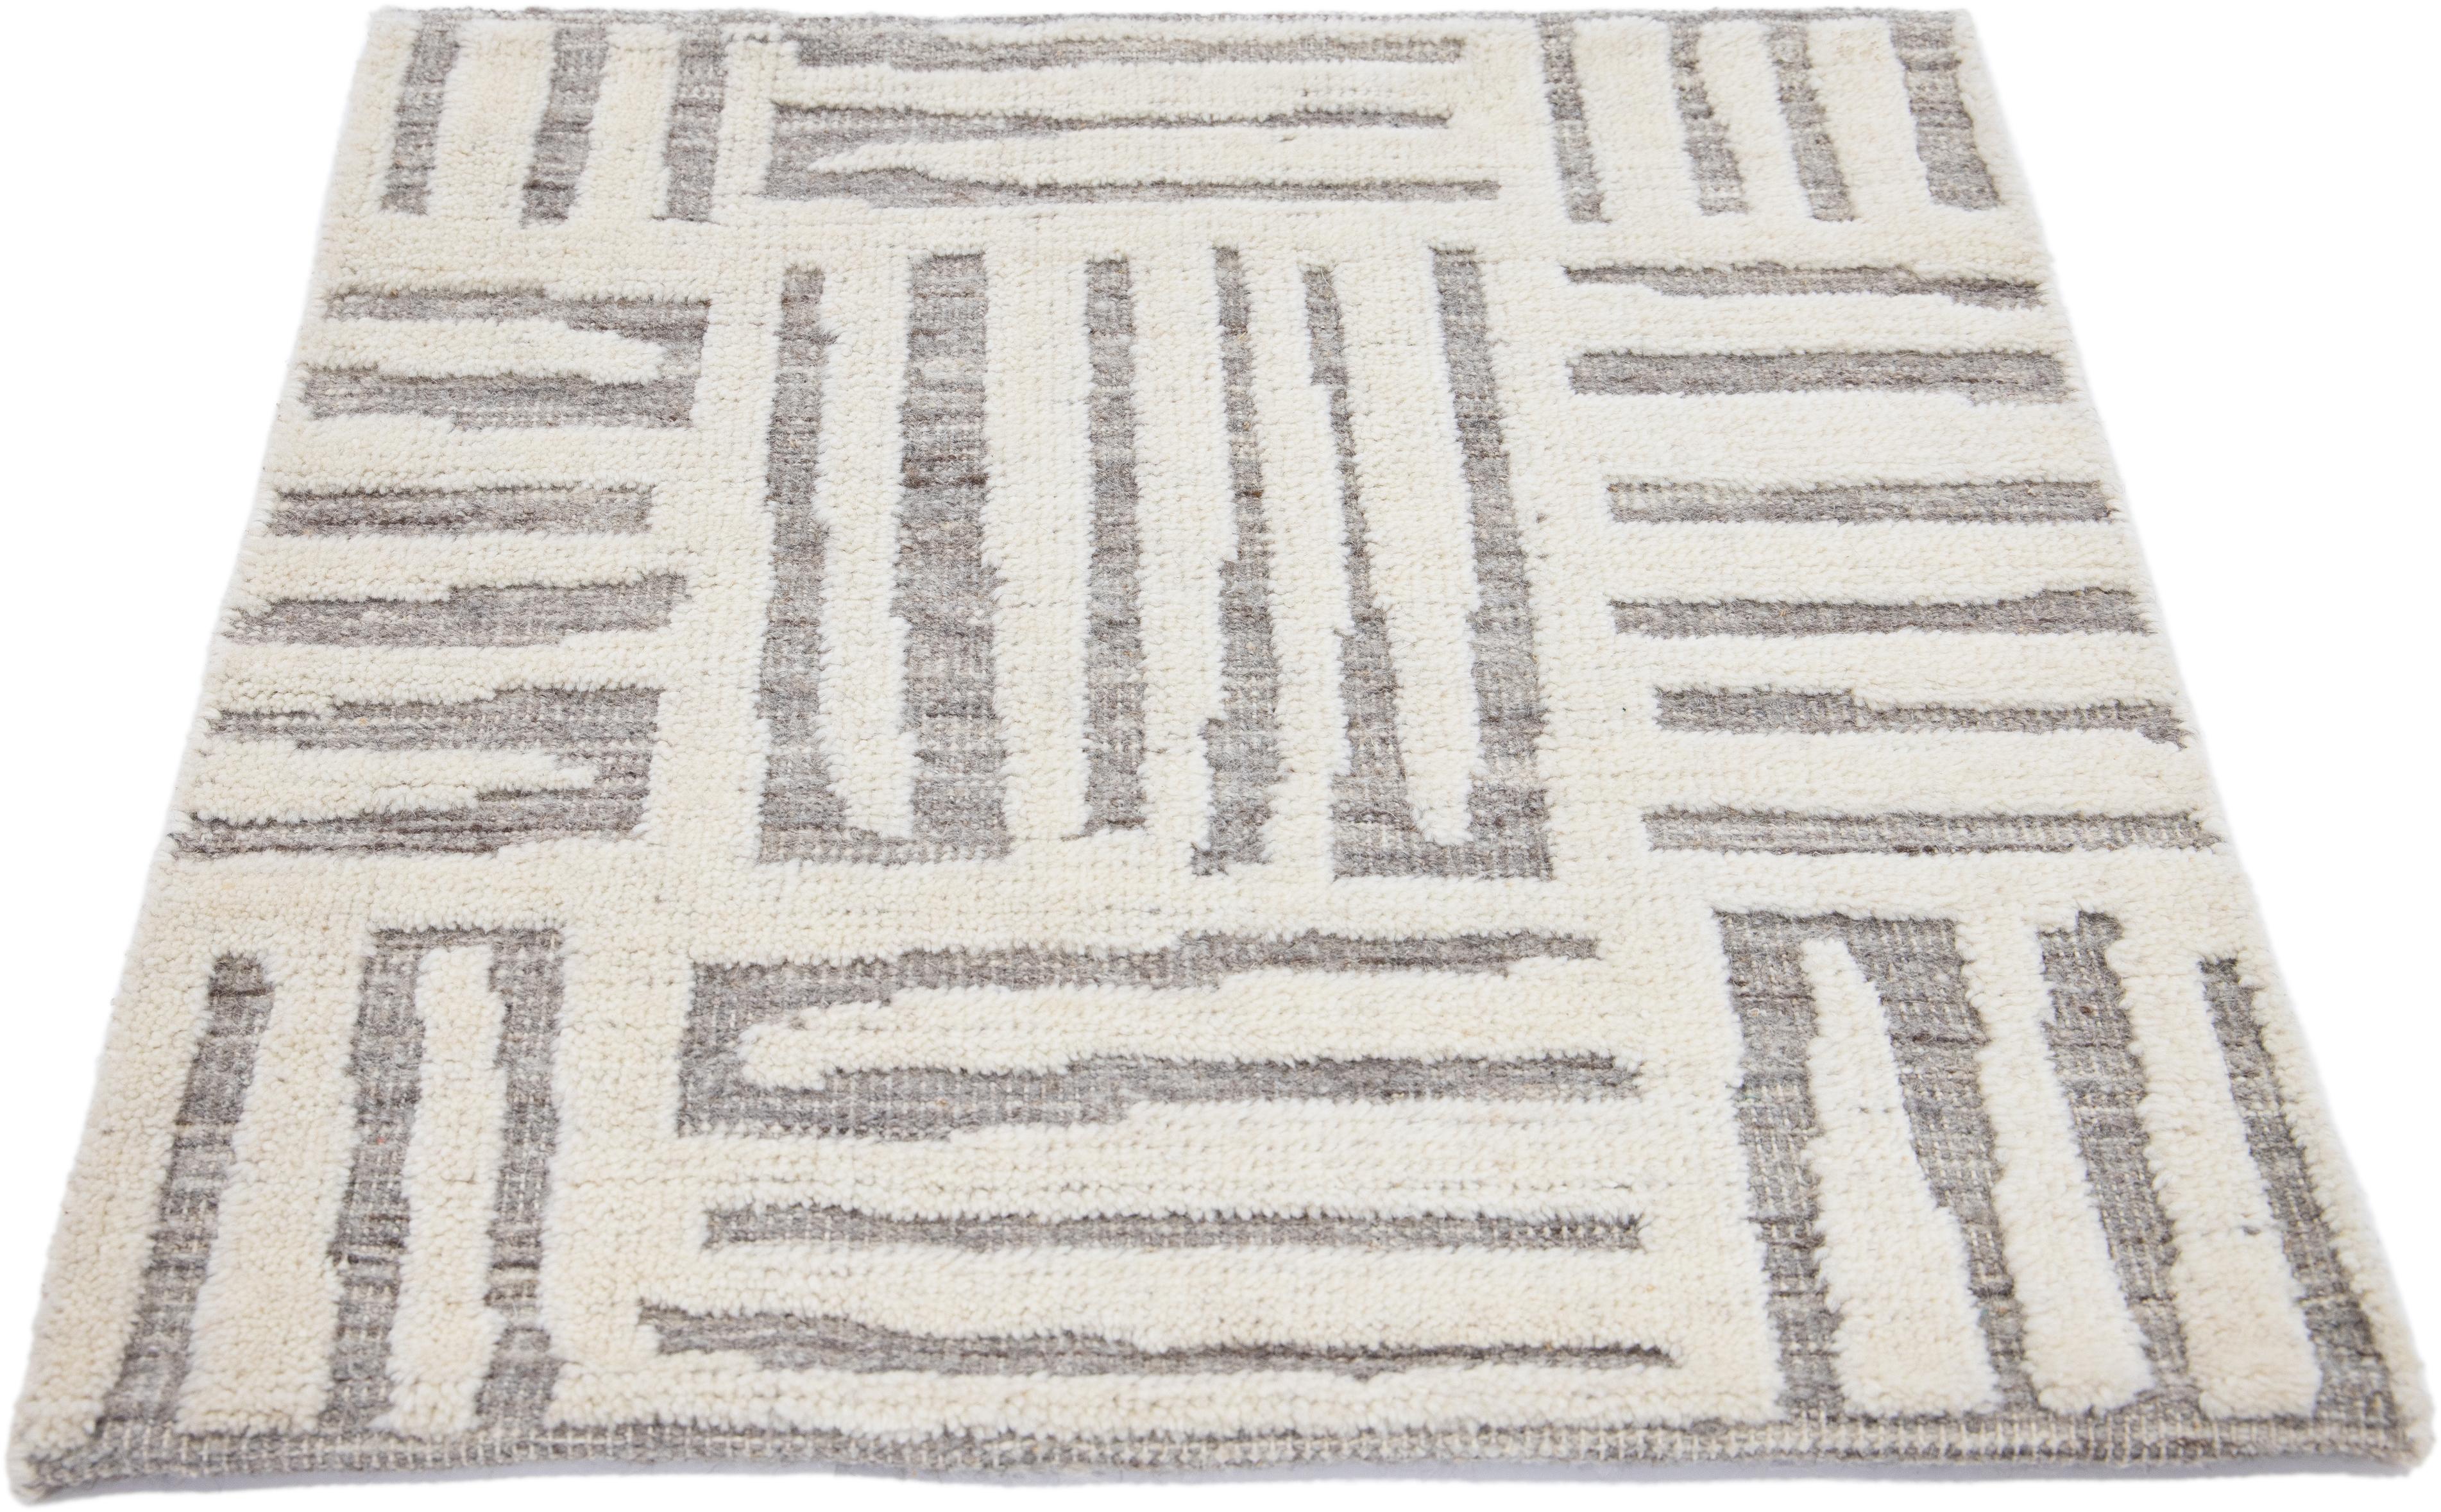 Apadana's Modern Moroccan Style new Zealand wool custom rug. Custom sizes and colors made-to-order. 

Material: New Zealand wool 
Techniques: Hand-knotted
Style: Moroccan 
Lead time: Approx. 15-16 wks available 
Colors: As shown, other custom